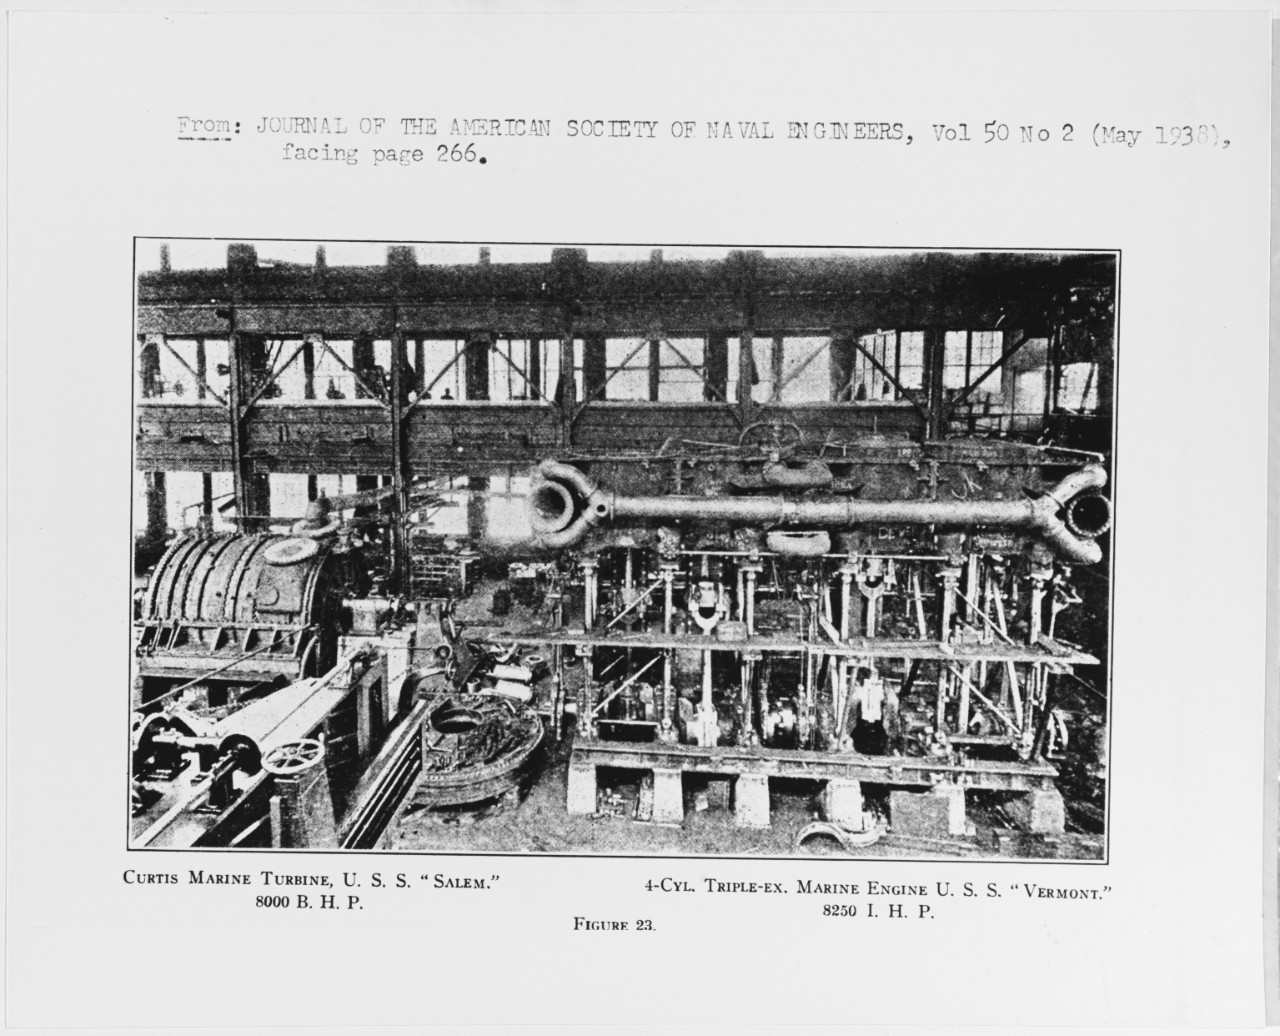 Machinery of USS SALEM (CL-3) and USS VERMONT (BB-20)